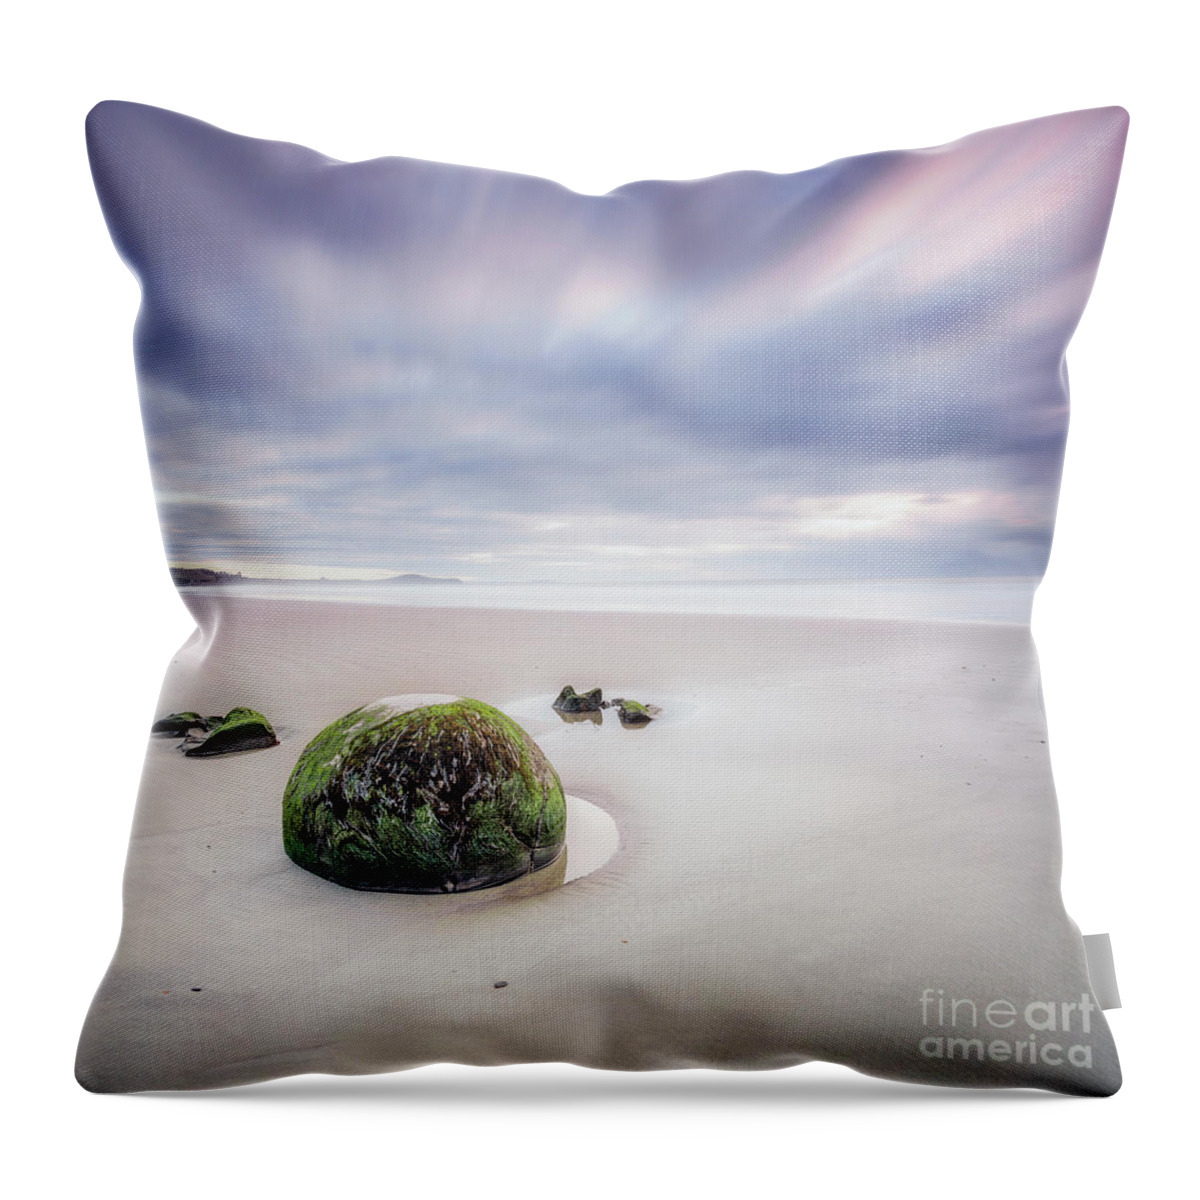 Kremsdorf Throw Pillow featuring the photograph Once Upon A Tide by Evelina Kremsdorf